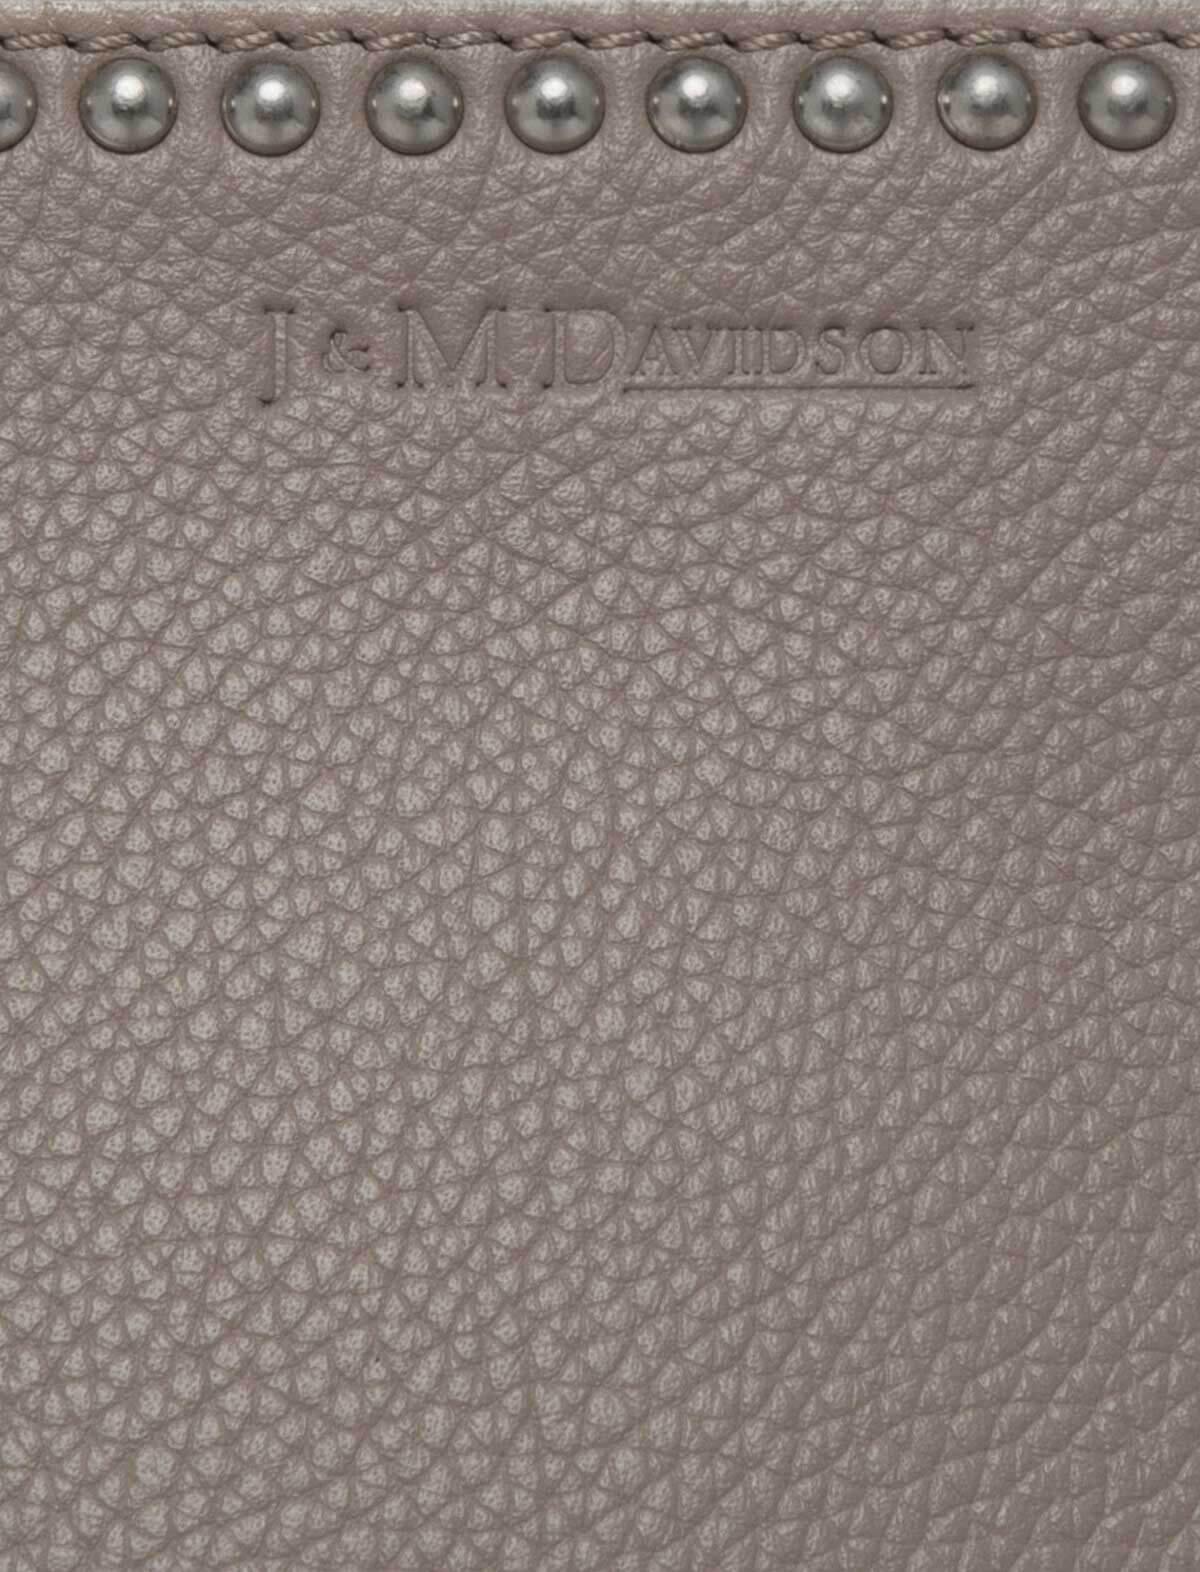 J&M DAVIDSON Large Bell With Studs In Warm Taupe | CLOSET Singapore